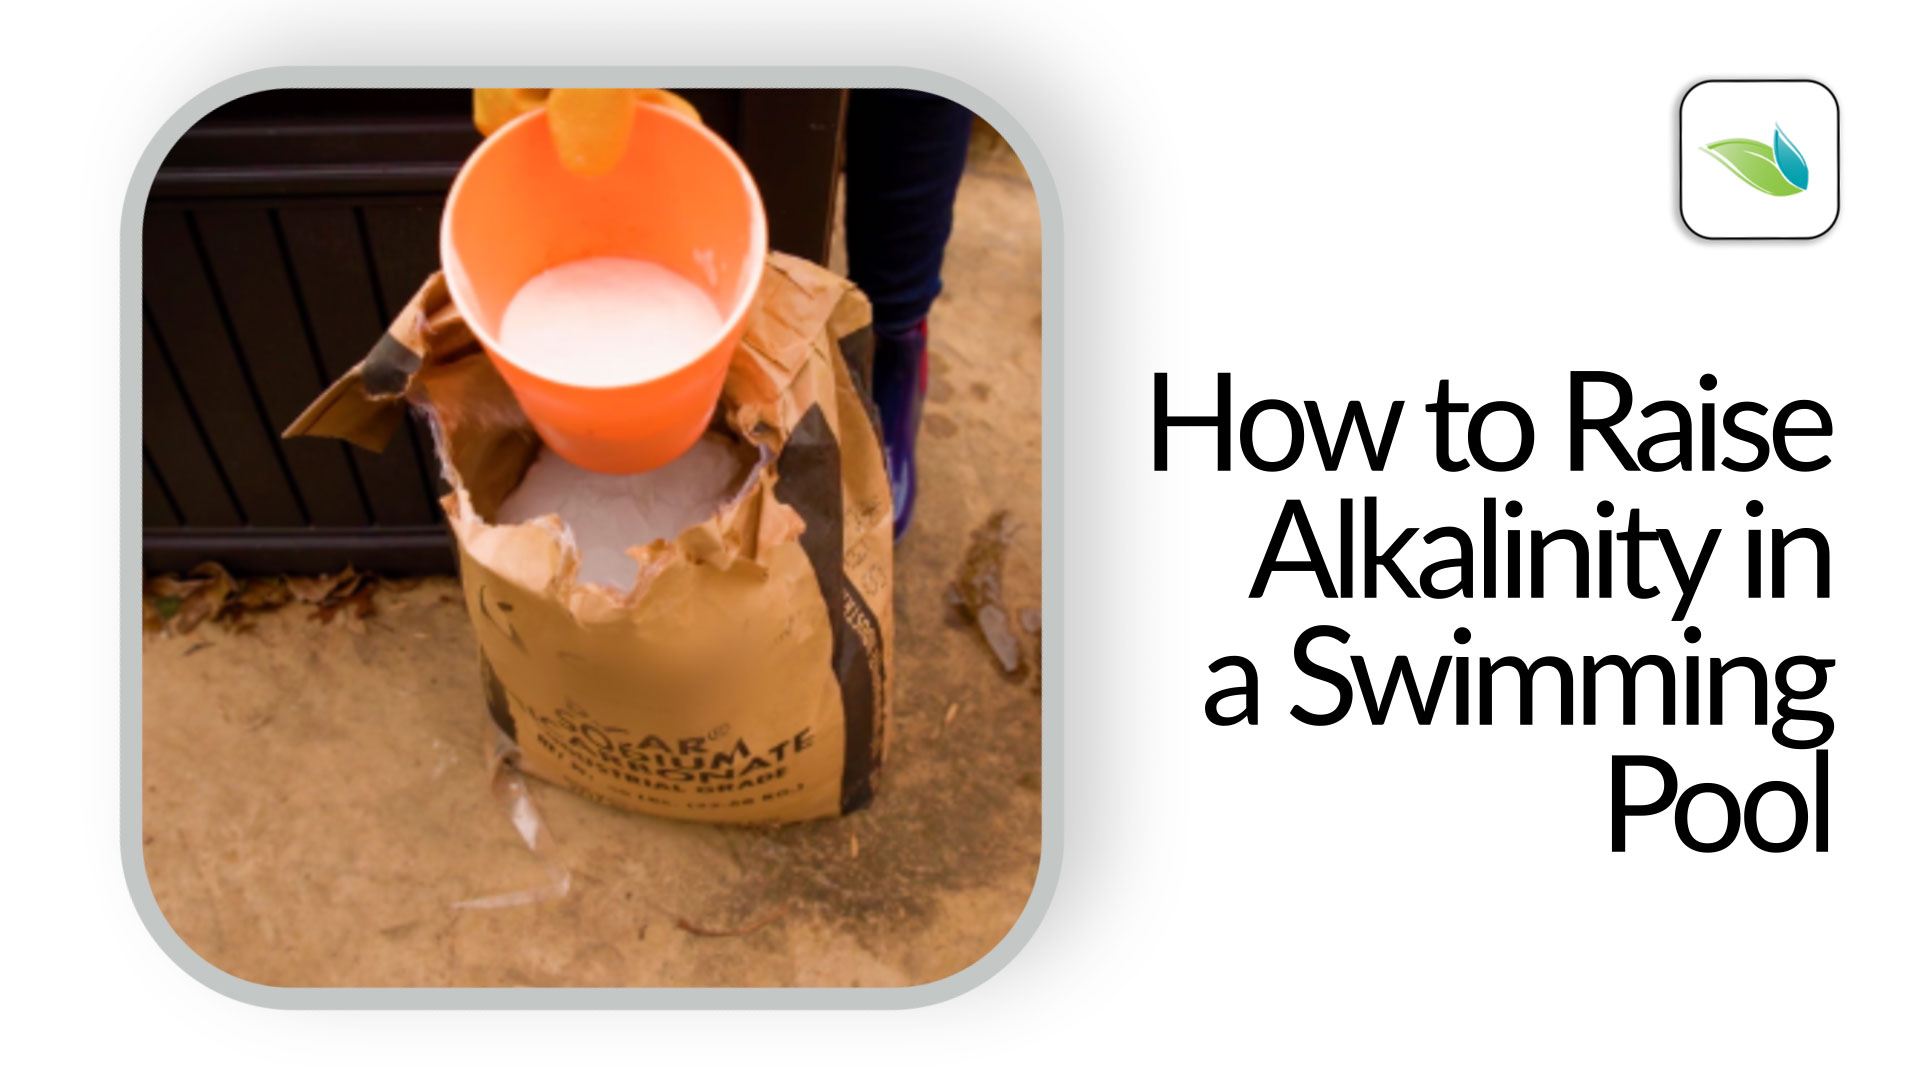 How to convert cups of alkalinity up to pounds